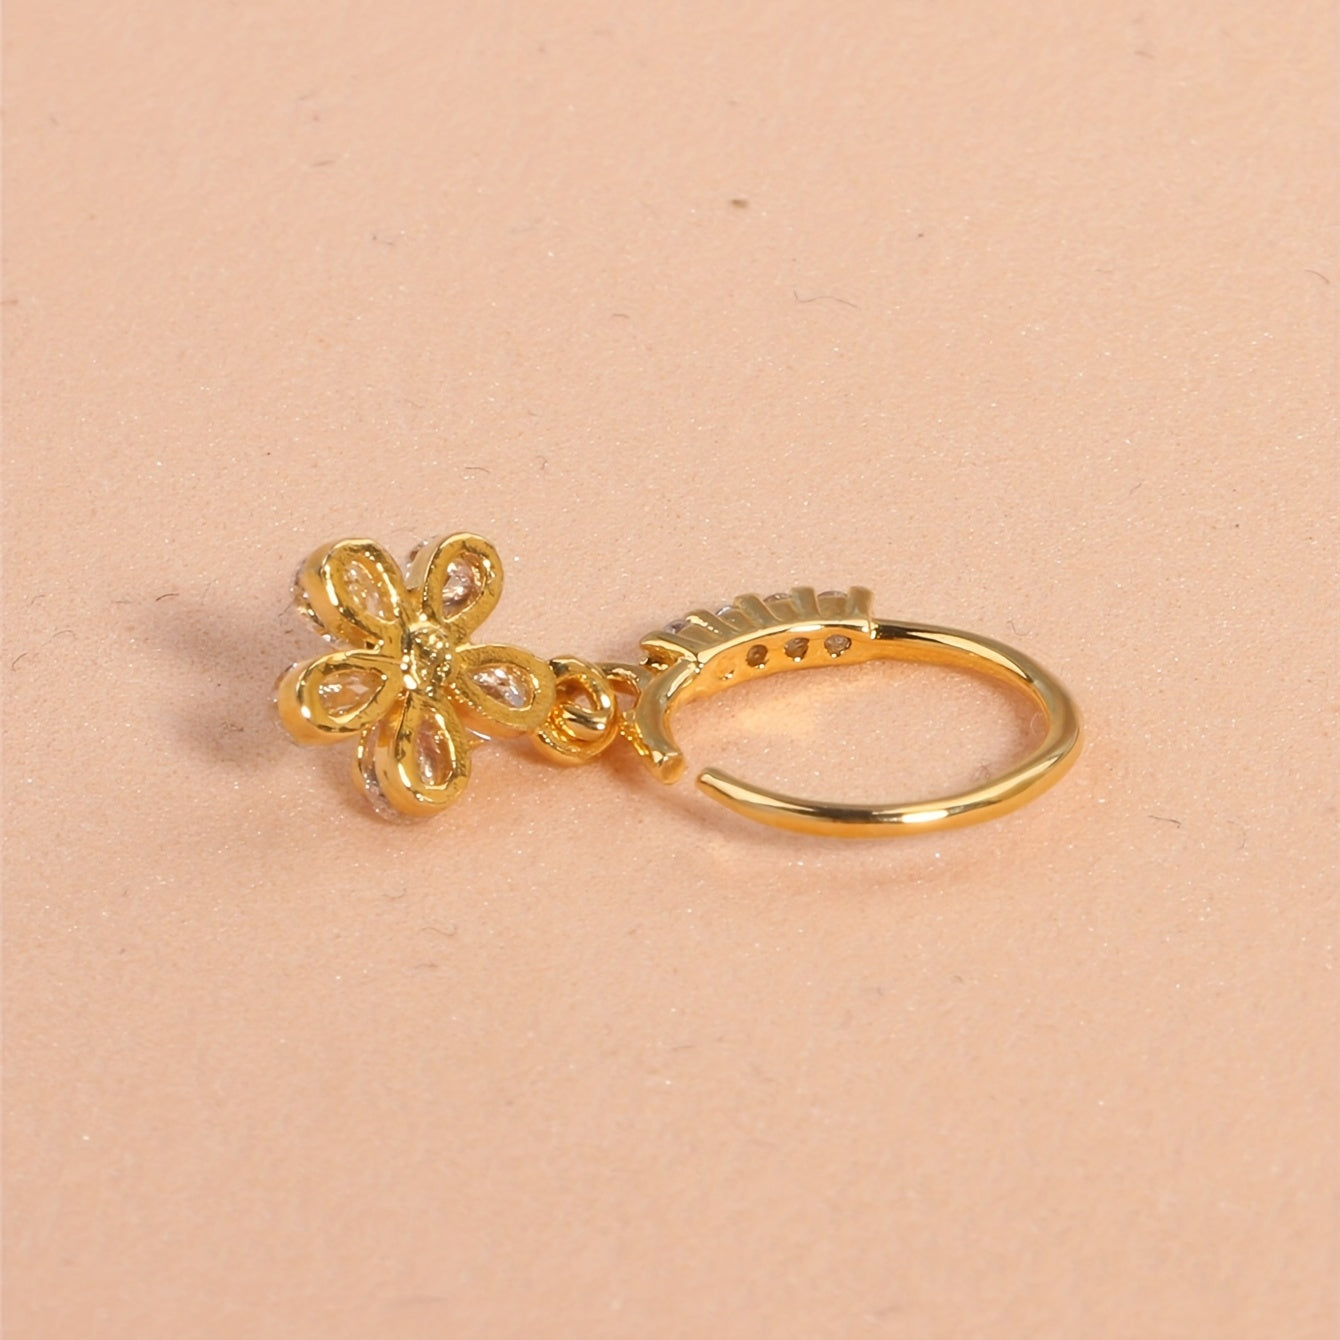 Add a Touch of Feminine Charm with our Flower Shape Pendant Nose Hoop Rings